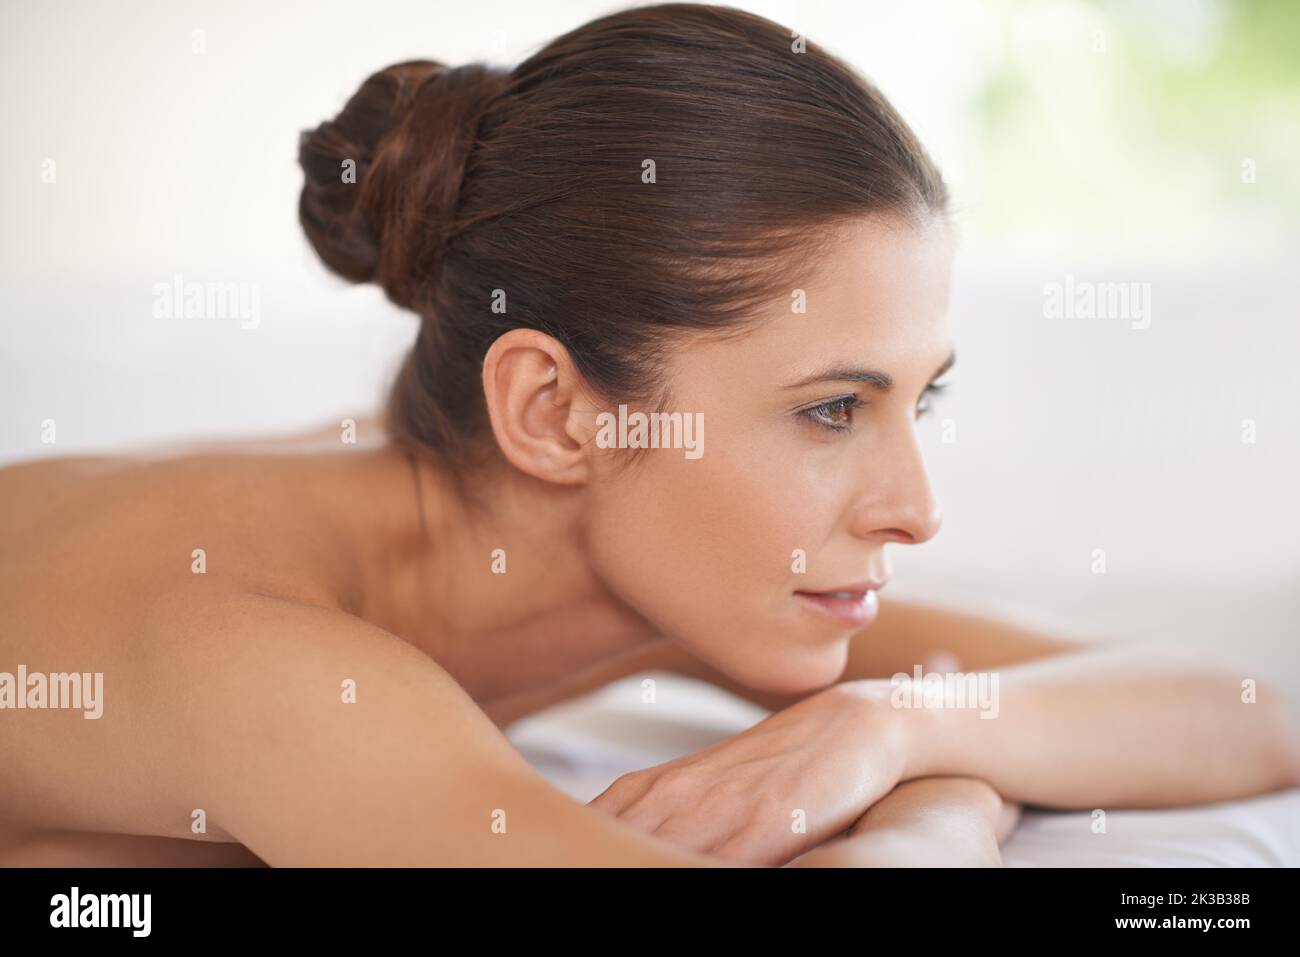 The spa lets her troubles slip away. a beautiful brunette woman enjoying her day at the spa. Stock Photo